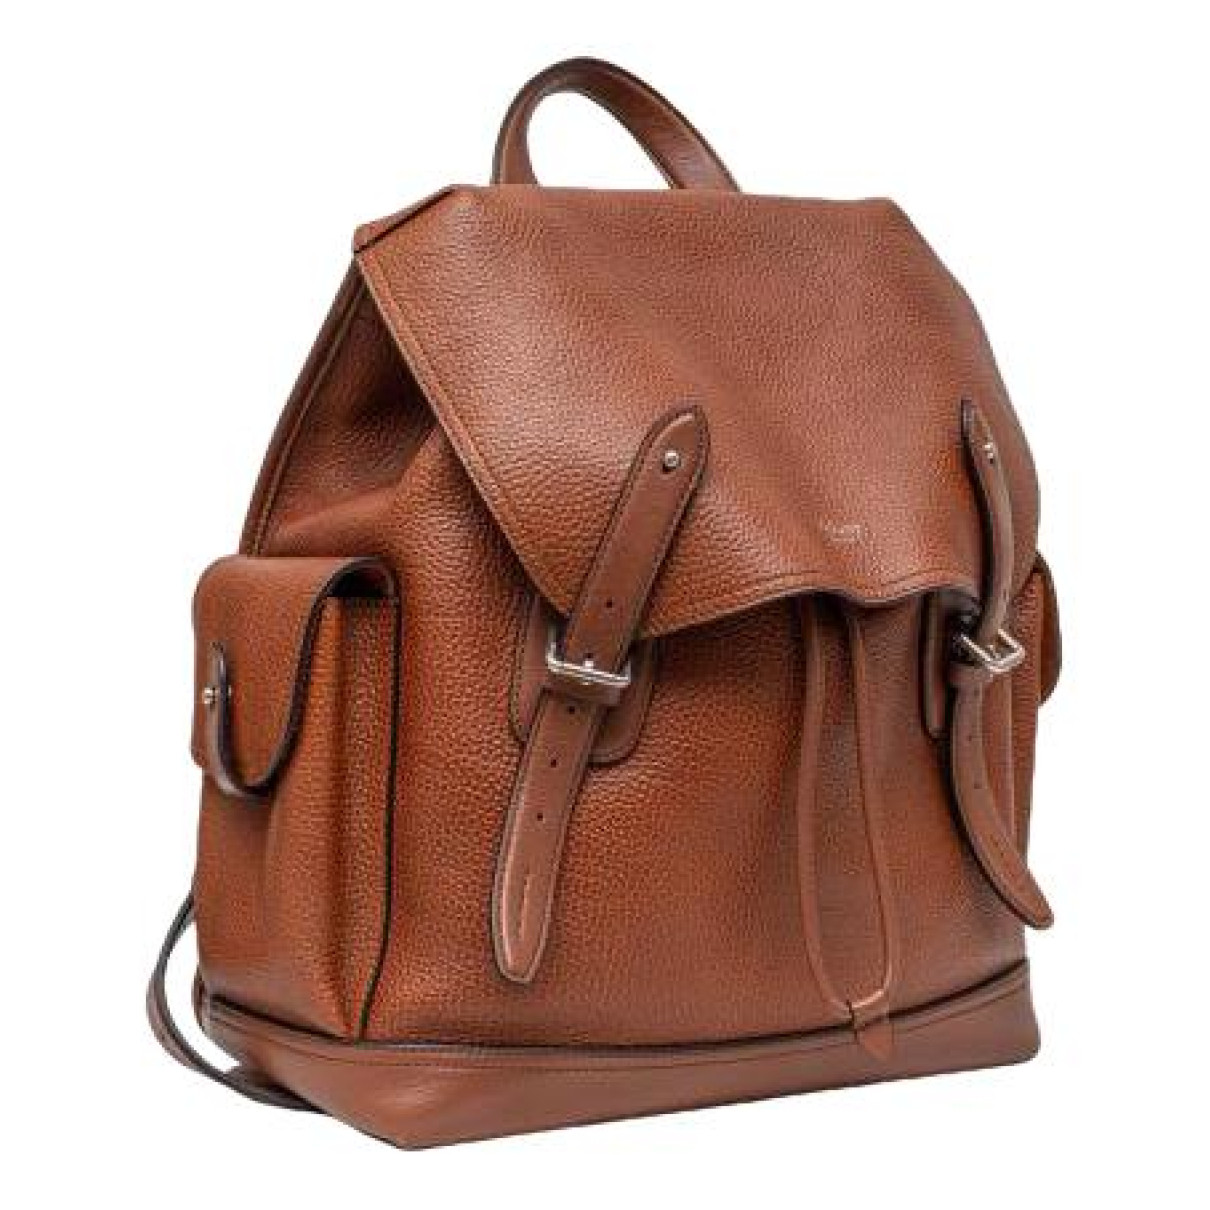 bags Mulberry backpacks Heritage for Female Leather. Used condition